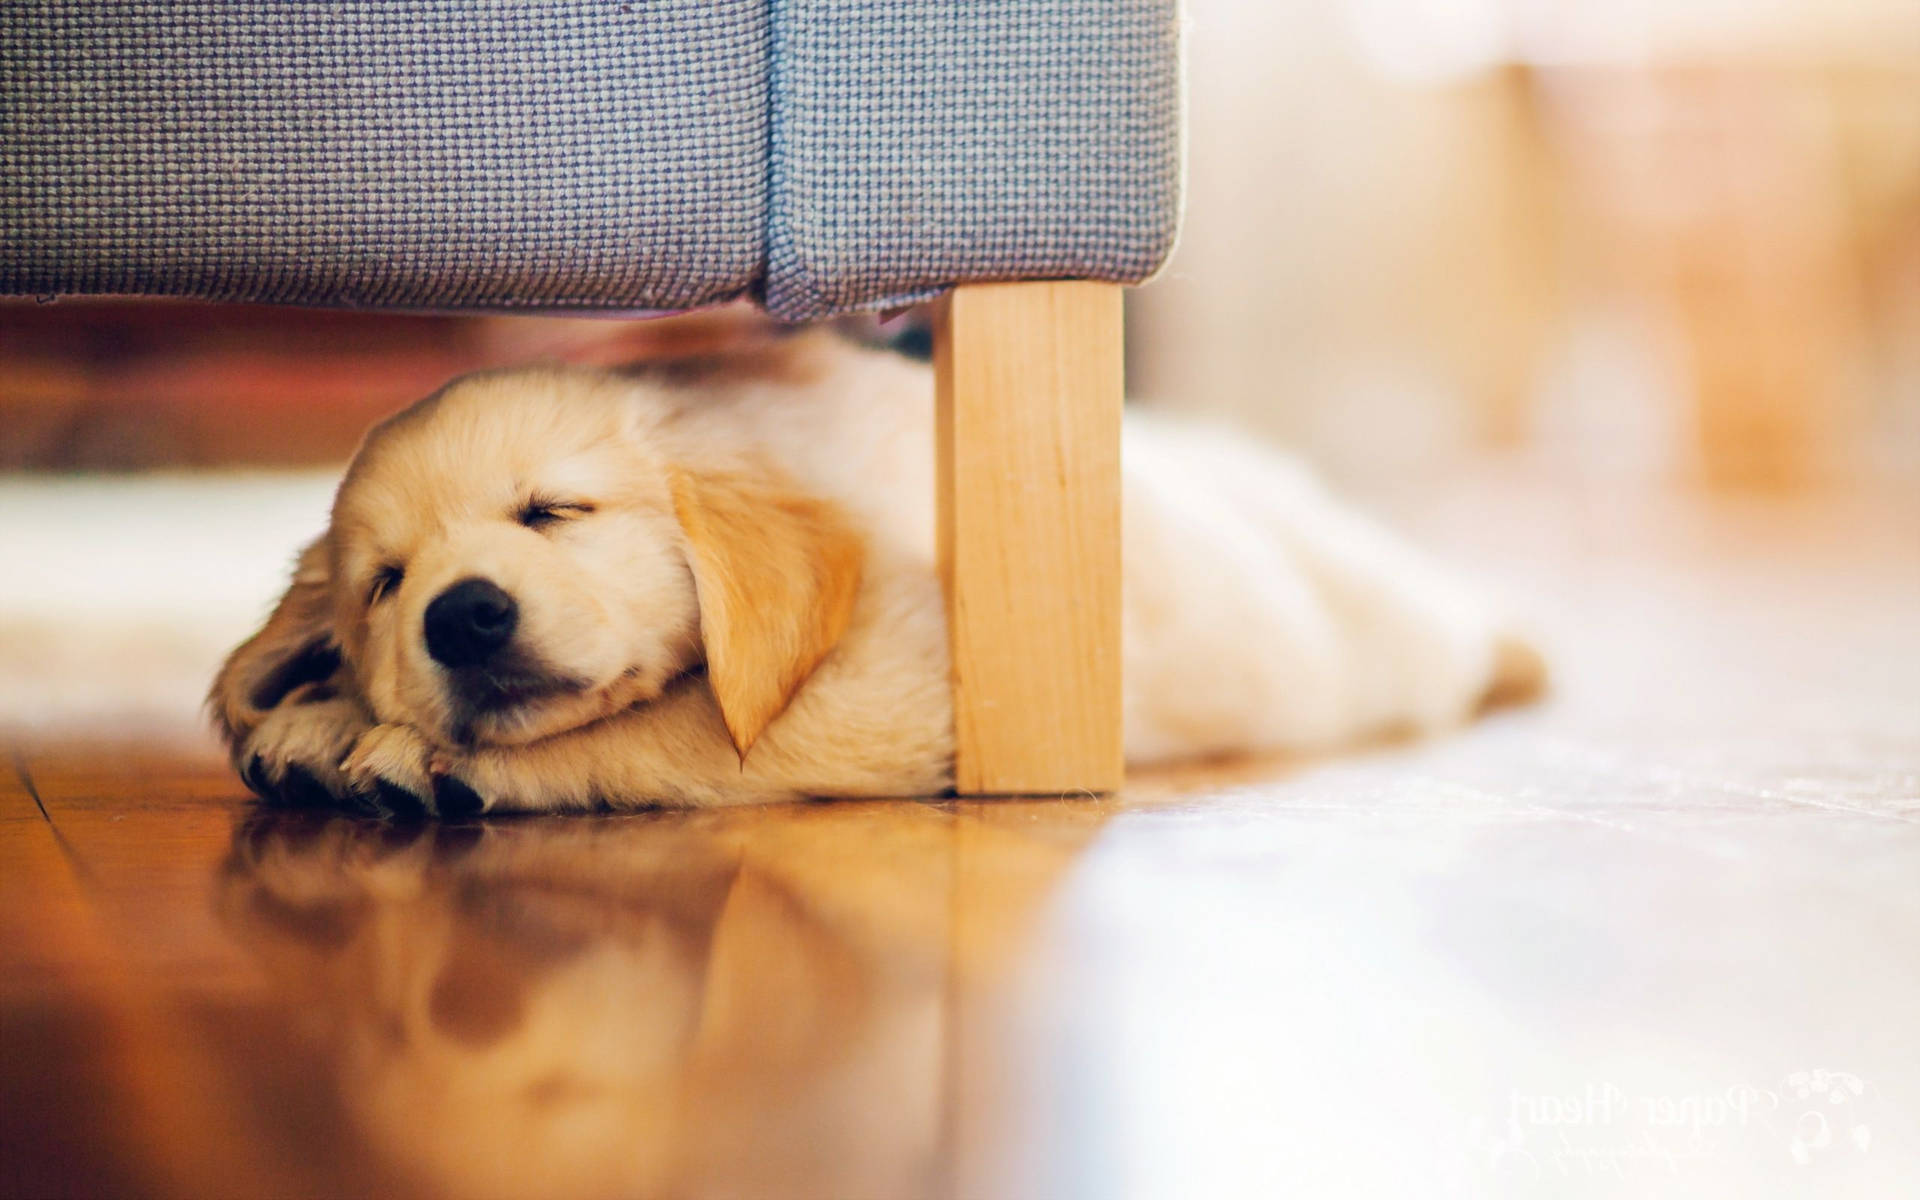 Sleeping Baby Retriever Dog Under The Couch Background